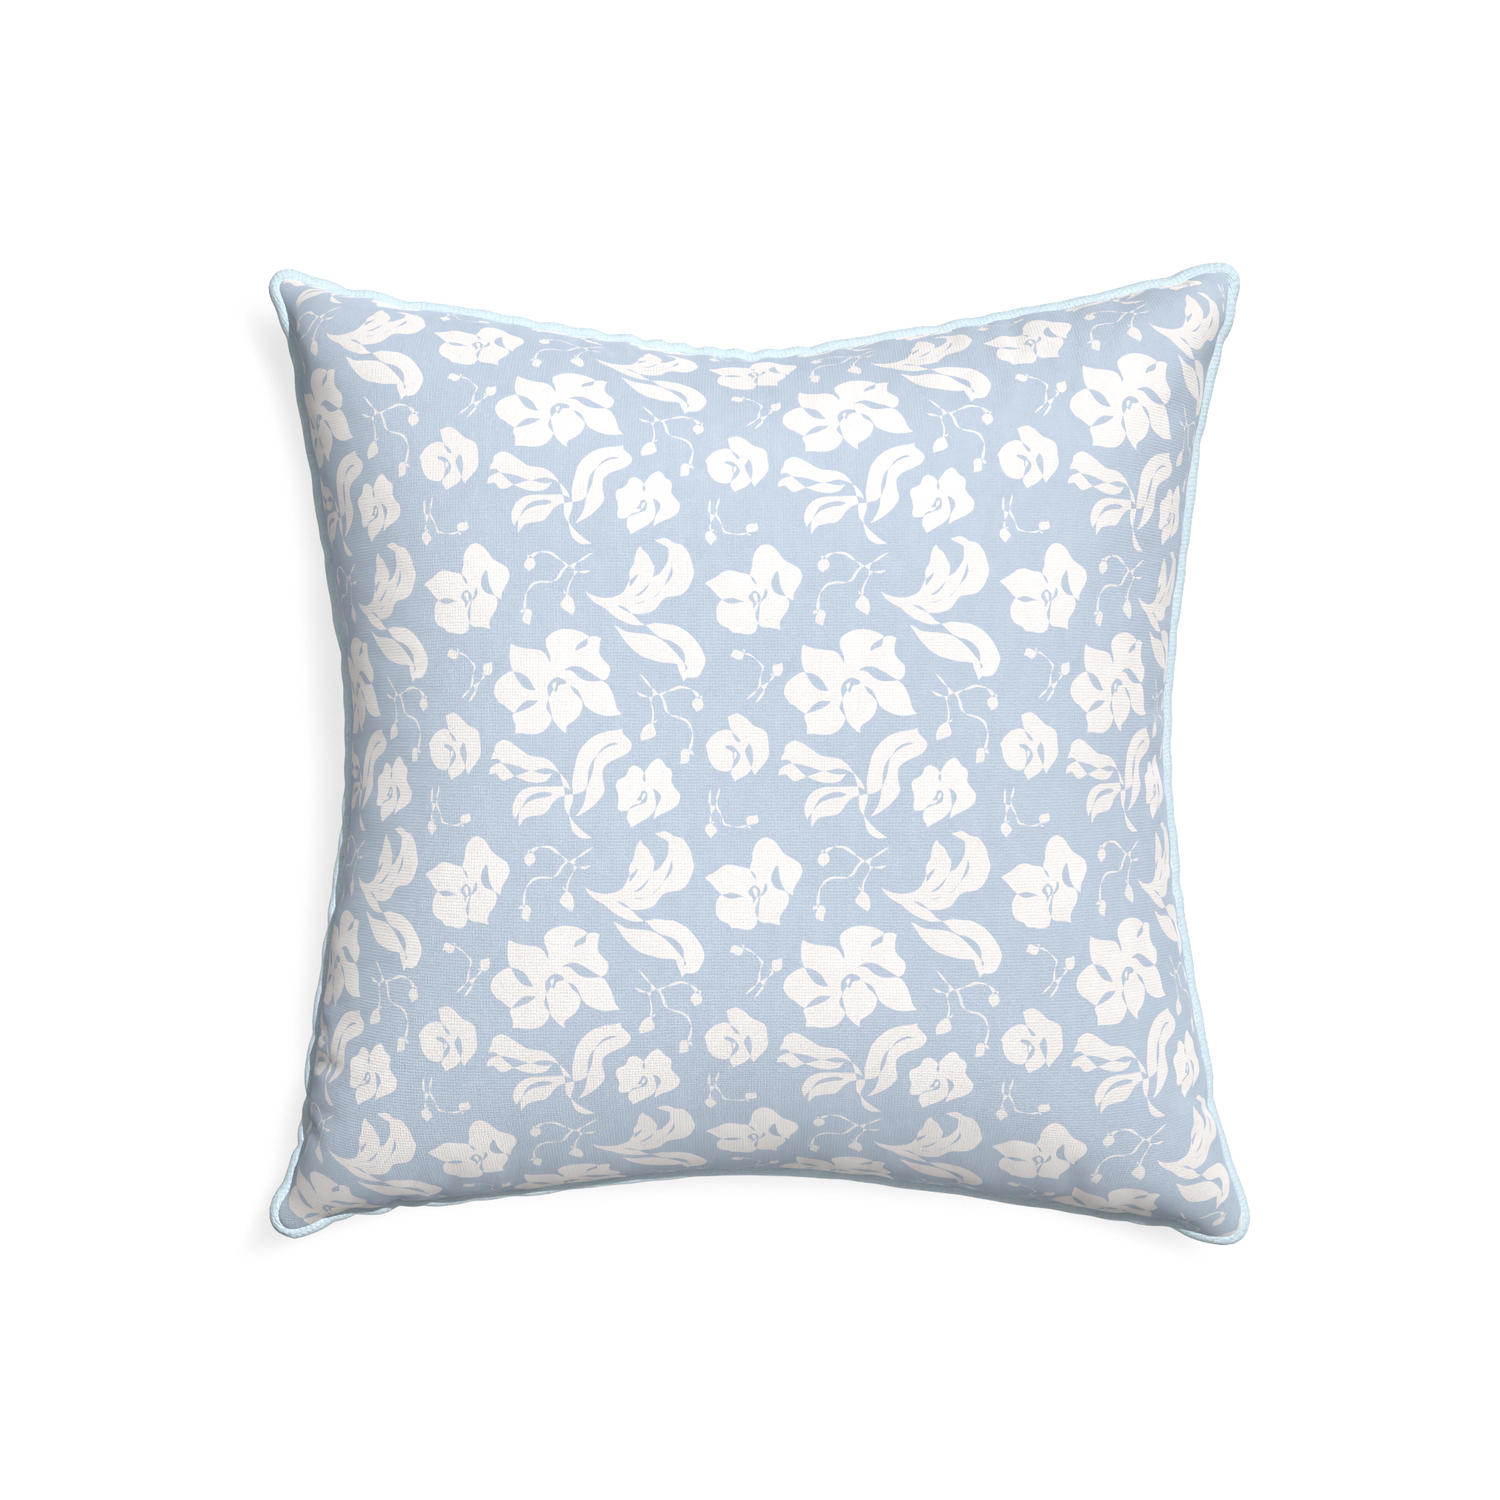 22-square georgia custom cornflower blue floralpillow with powder piping on white background